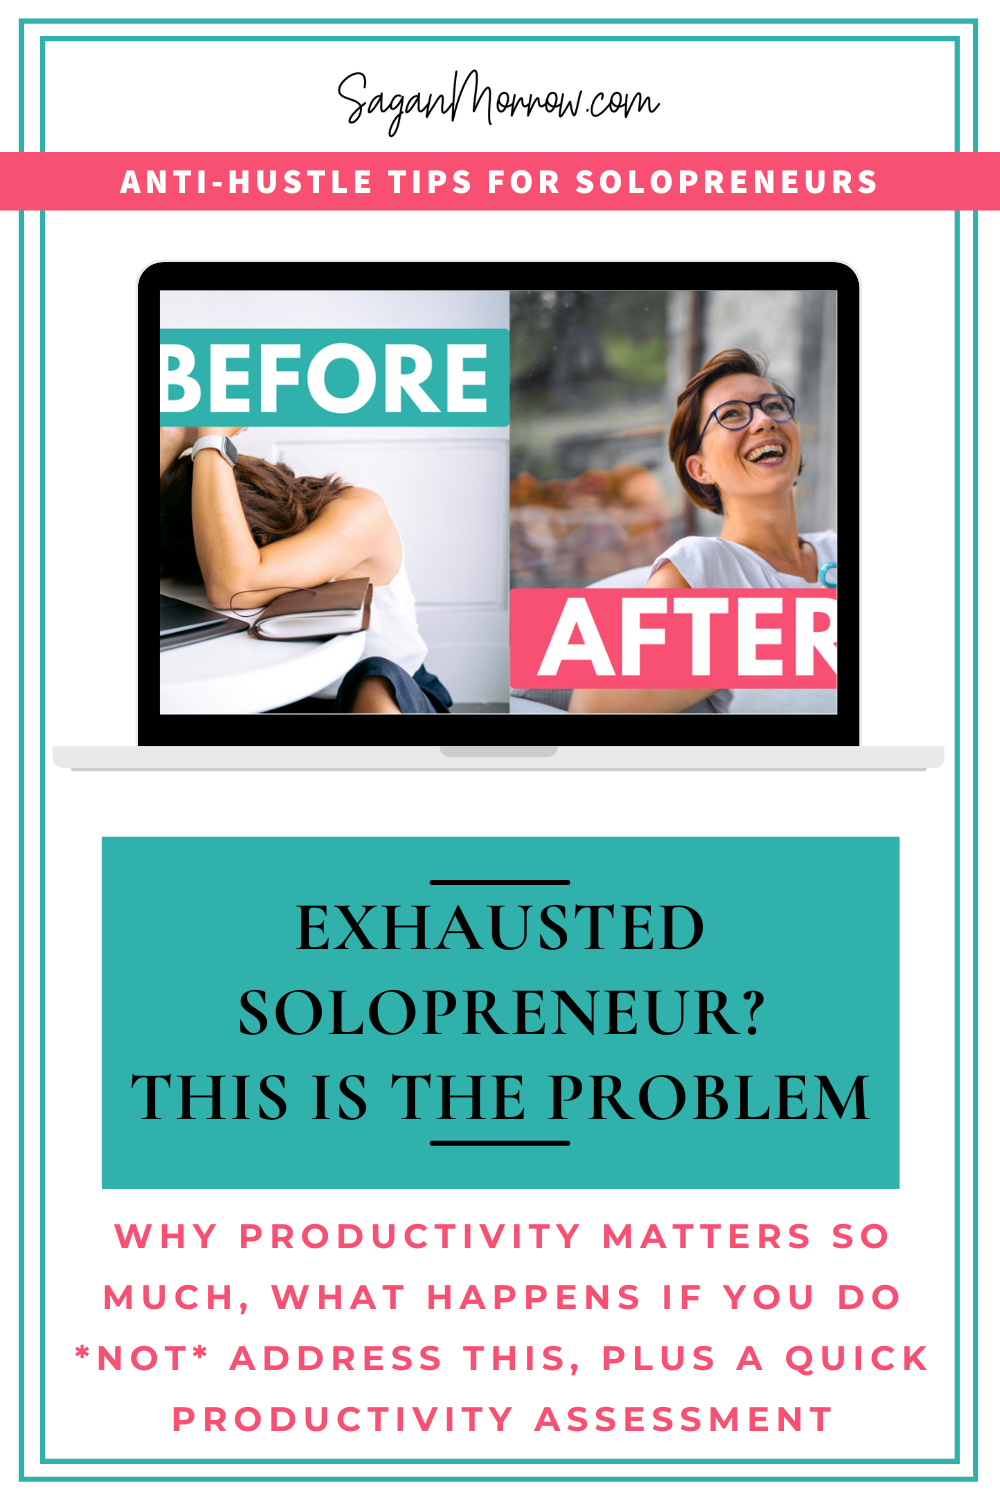 why productivity matters for solopreneurs